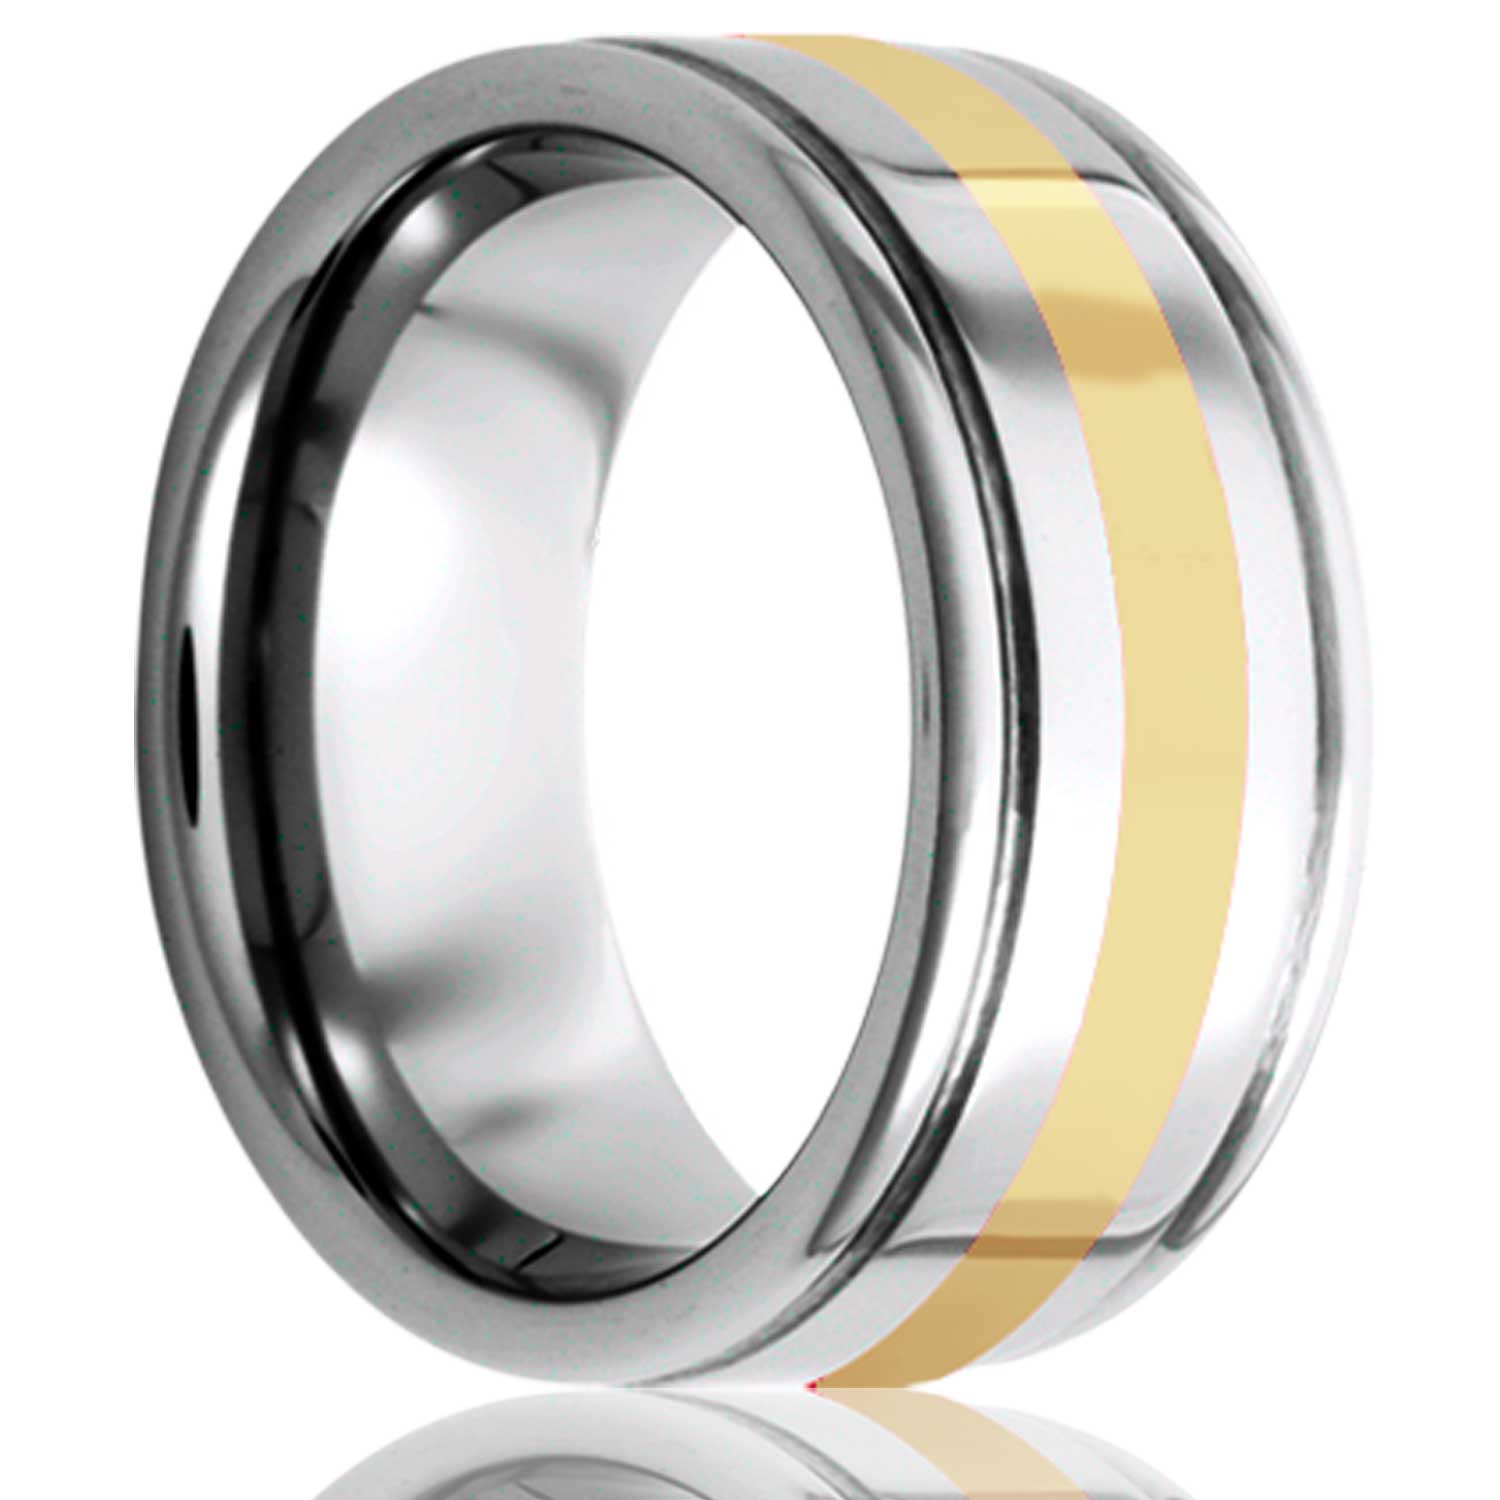 A 14k yellow gold inlay tungsten wedding band with grooved edges displayed on a neutral white background.